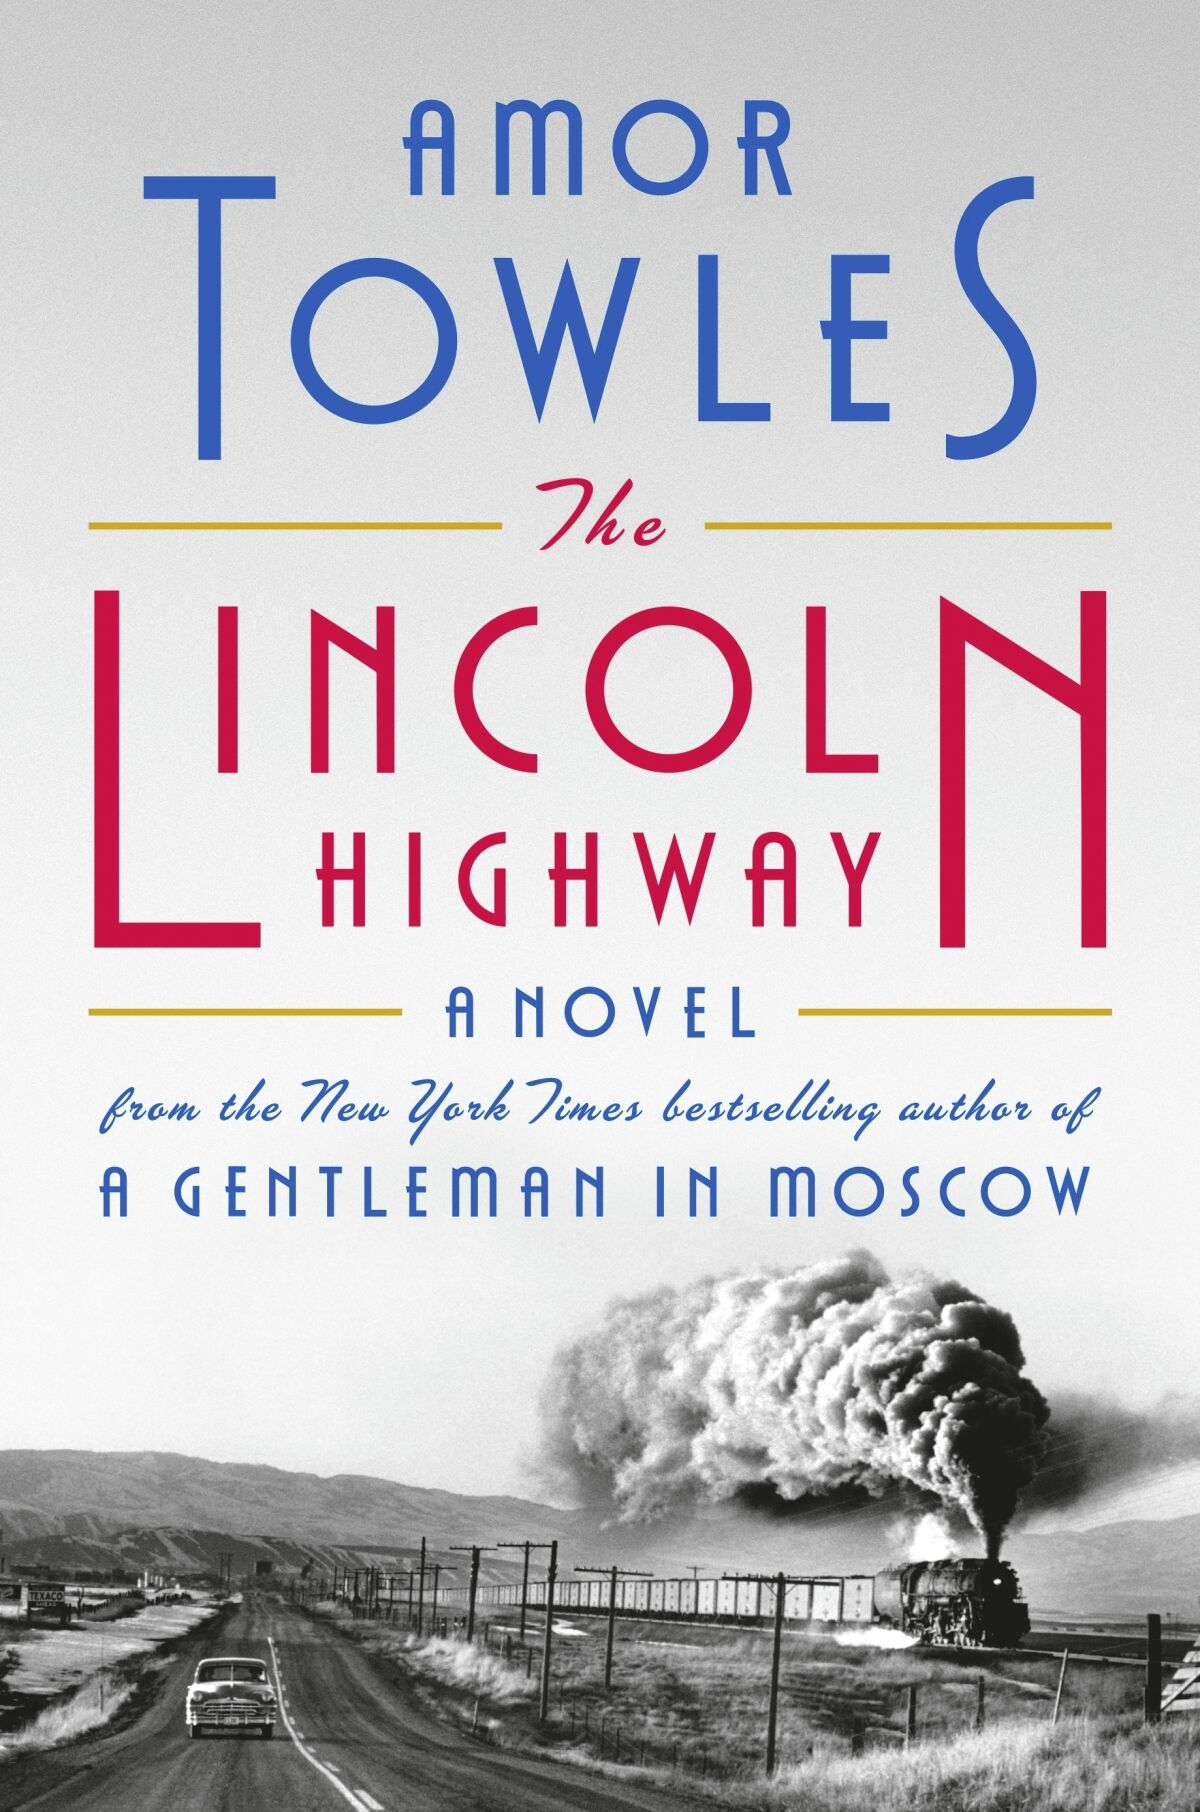 This cover image released by Viking shows "The Lincoln Highway" by Amor Towles. (Viking via AP)